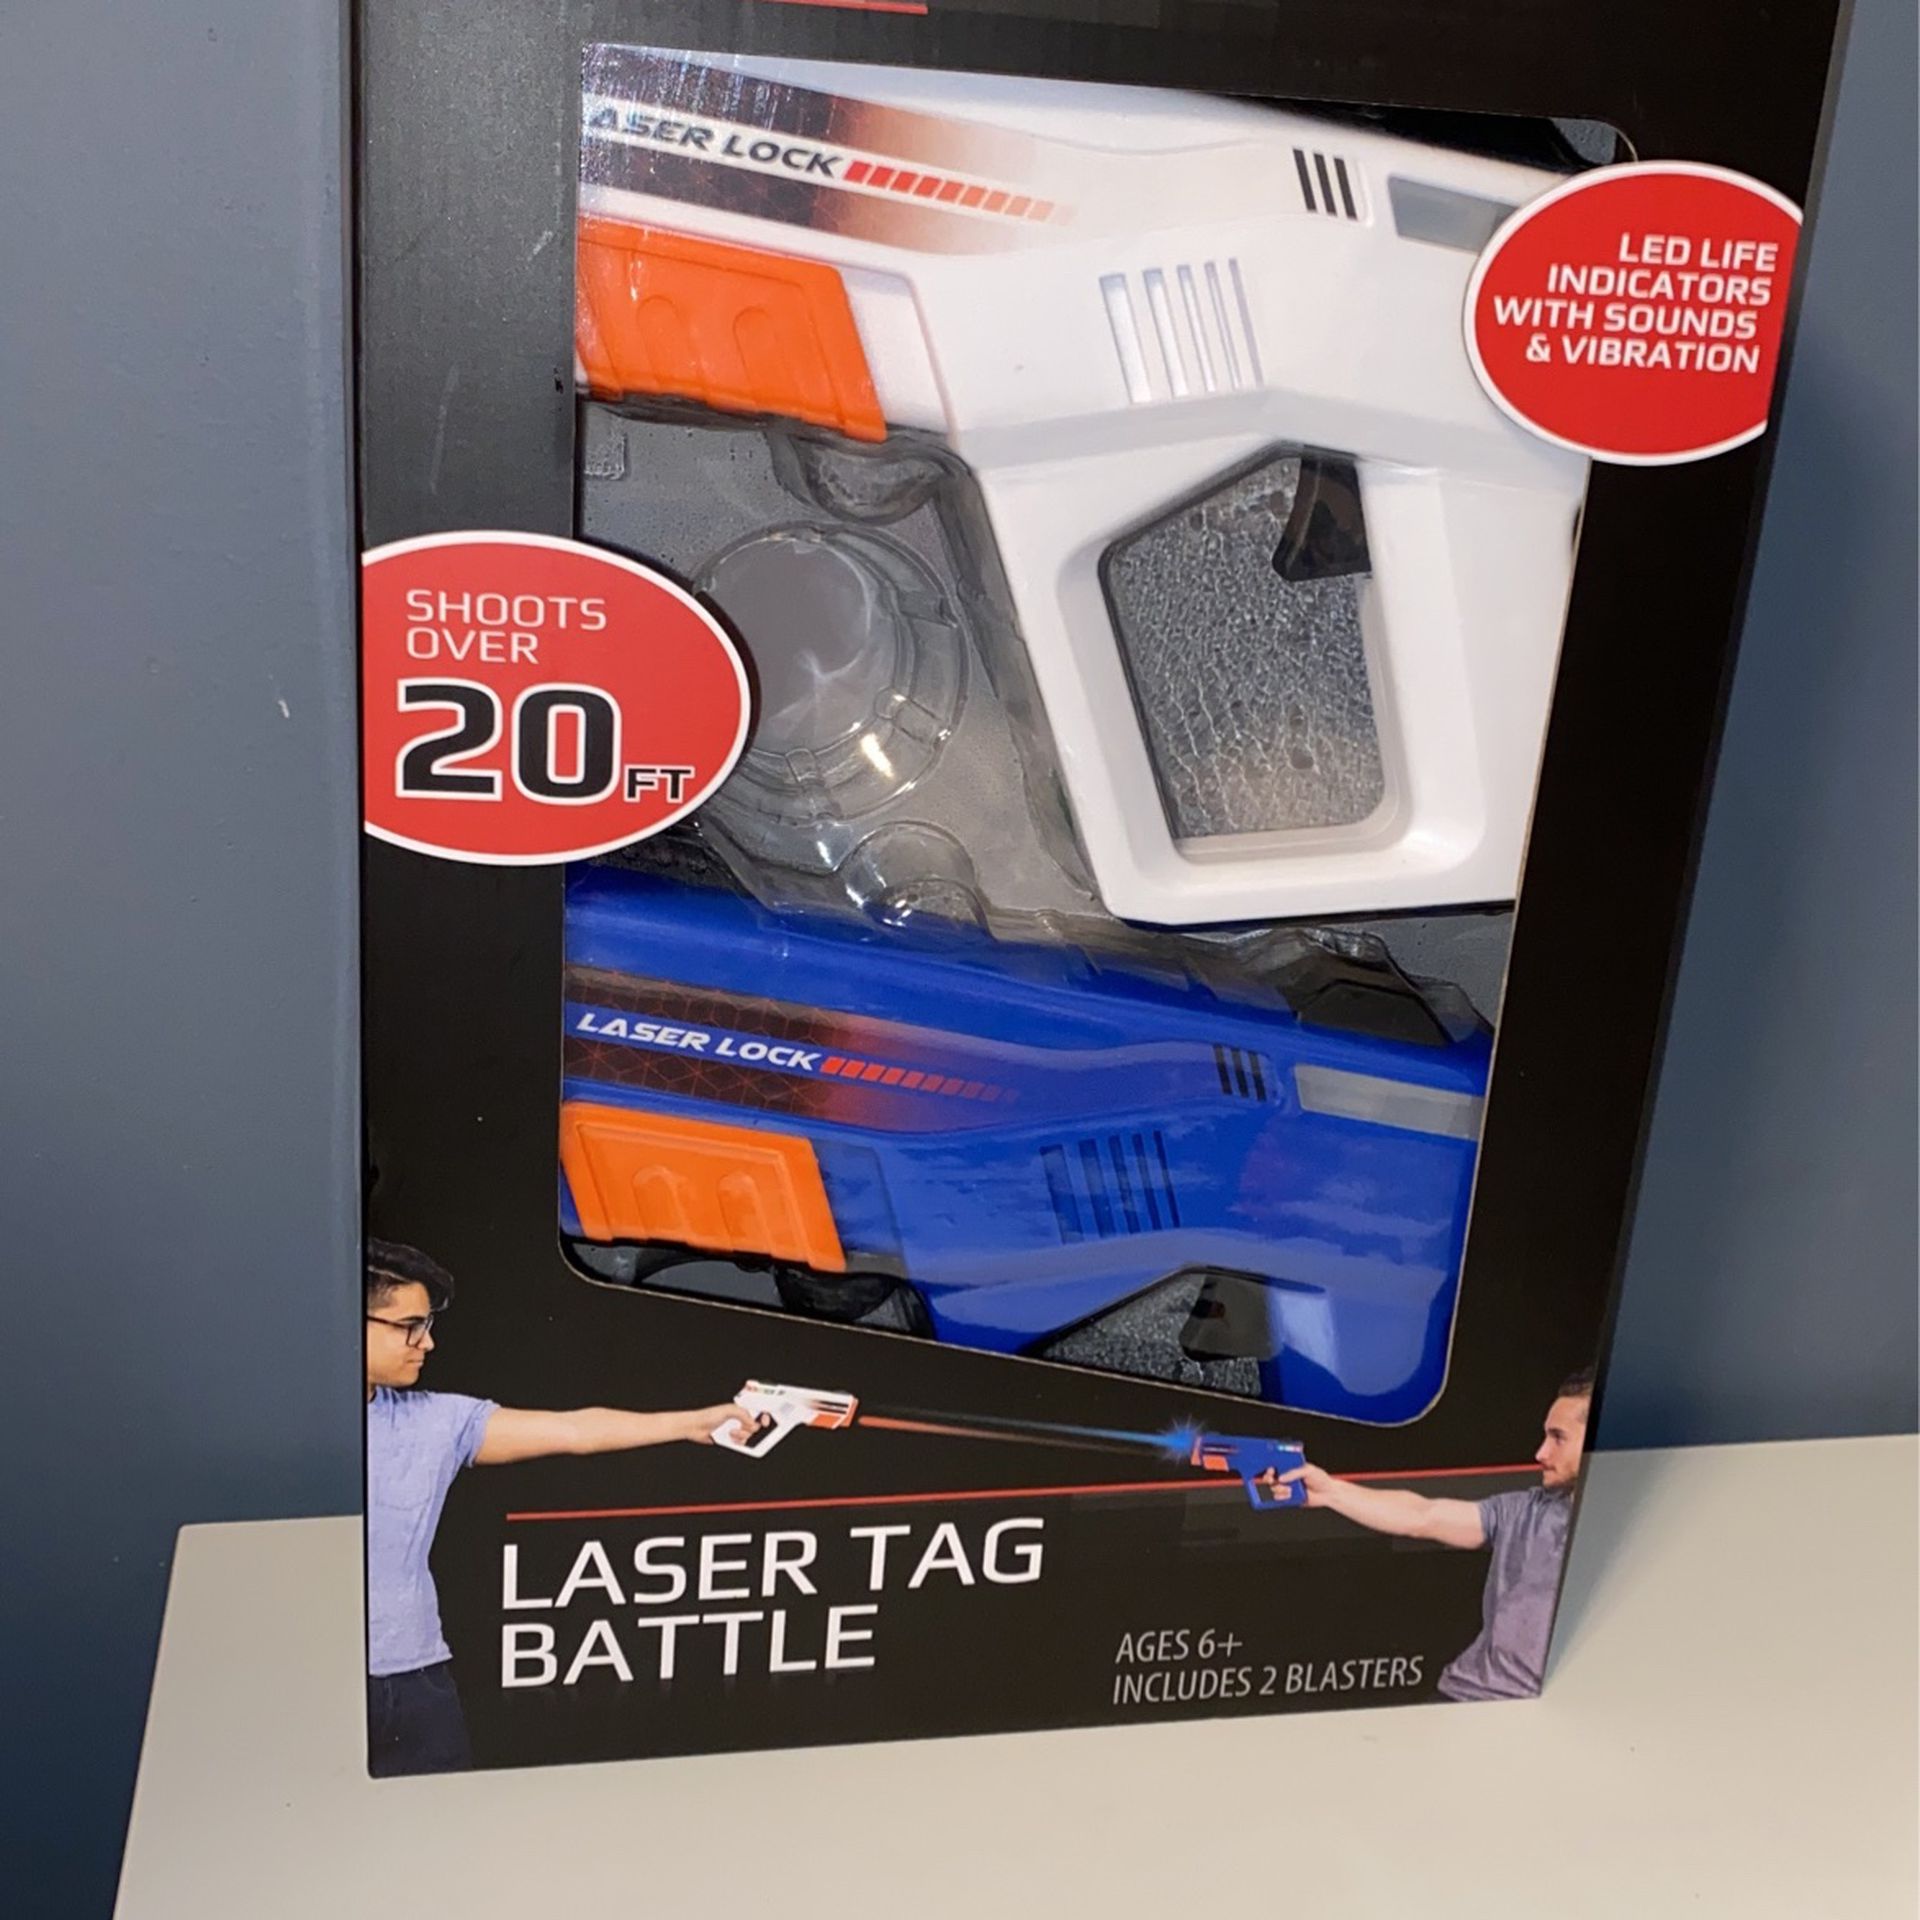 Funktion Laser Tag $7 Brand In New Never Opened